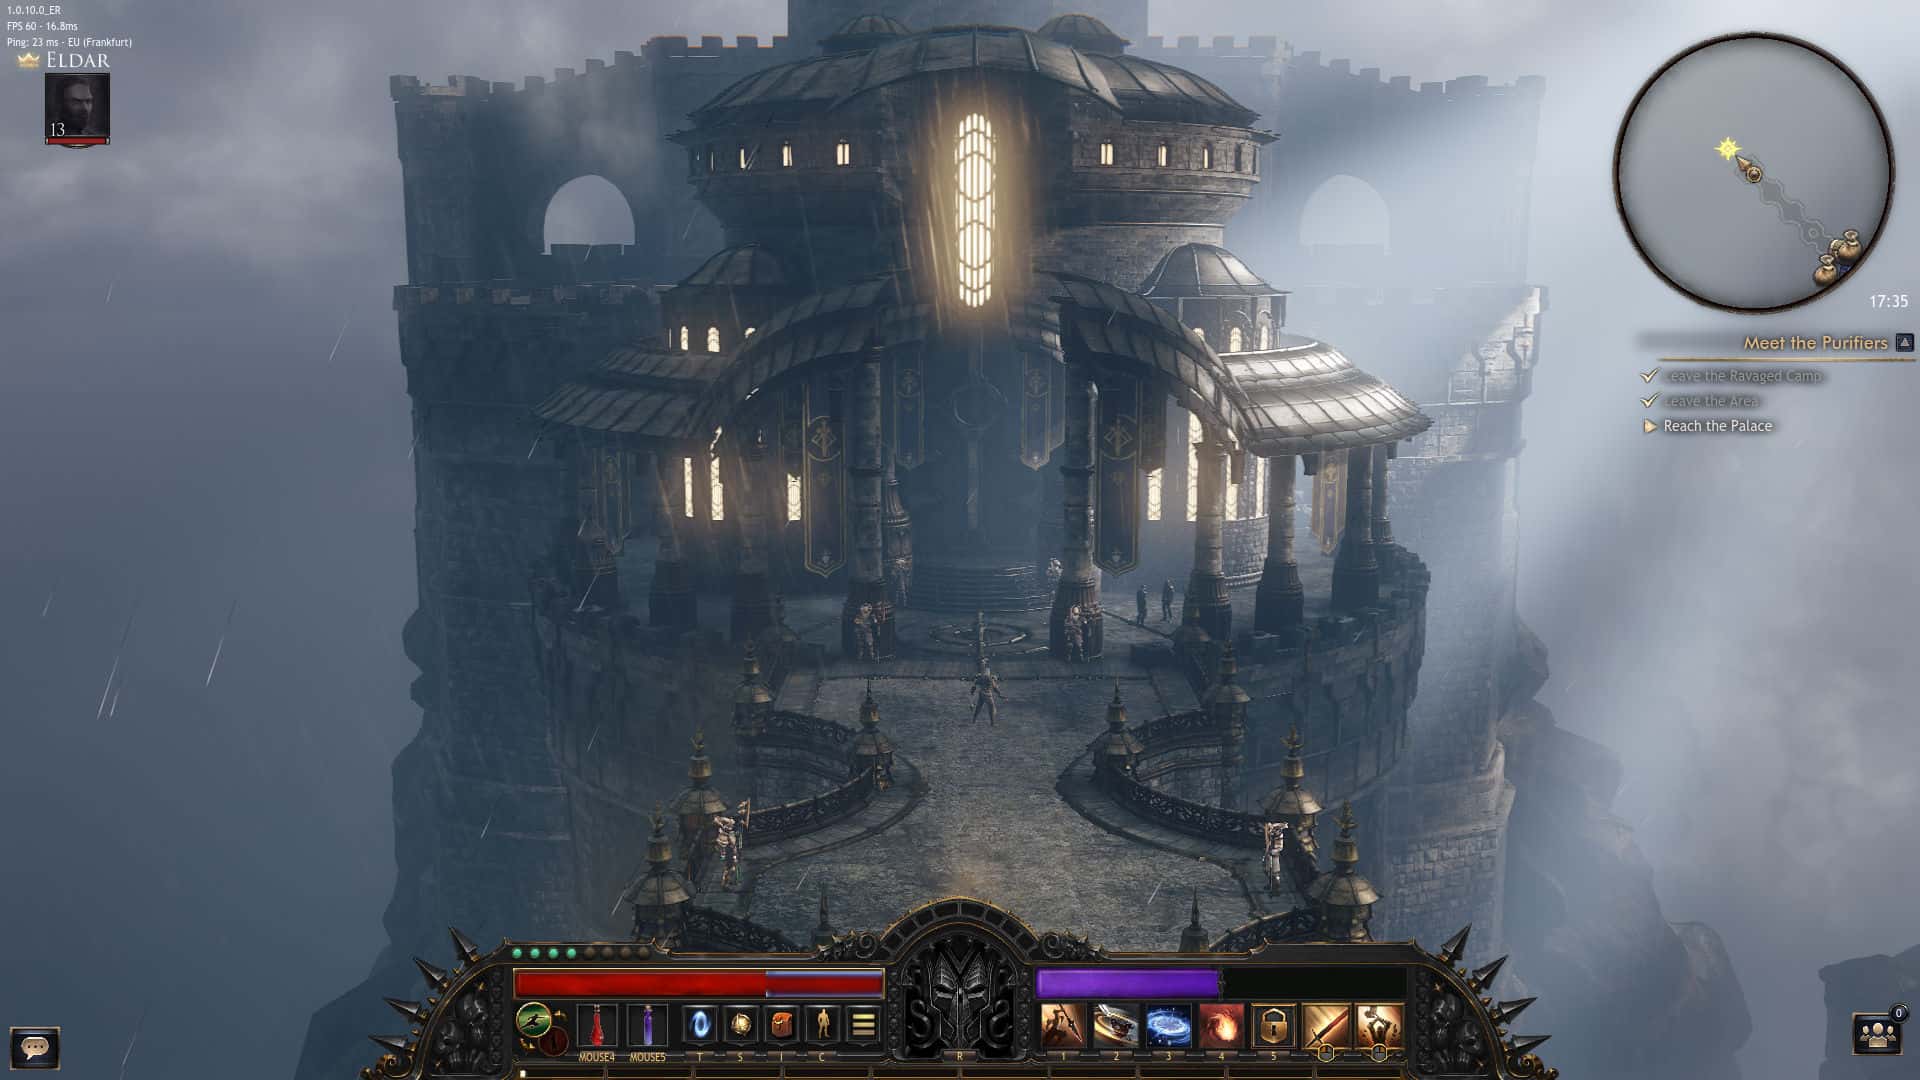 Wolcen: Lords of Mayhem instal the new version for mac